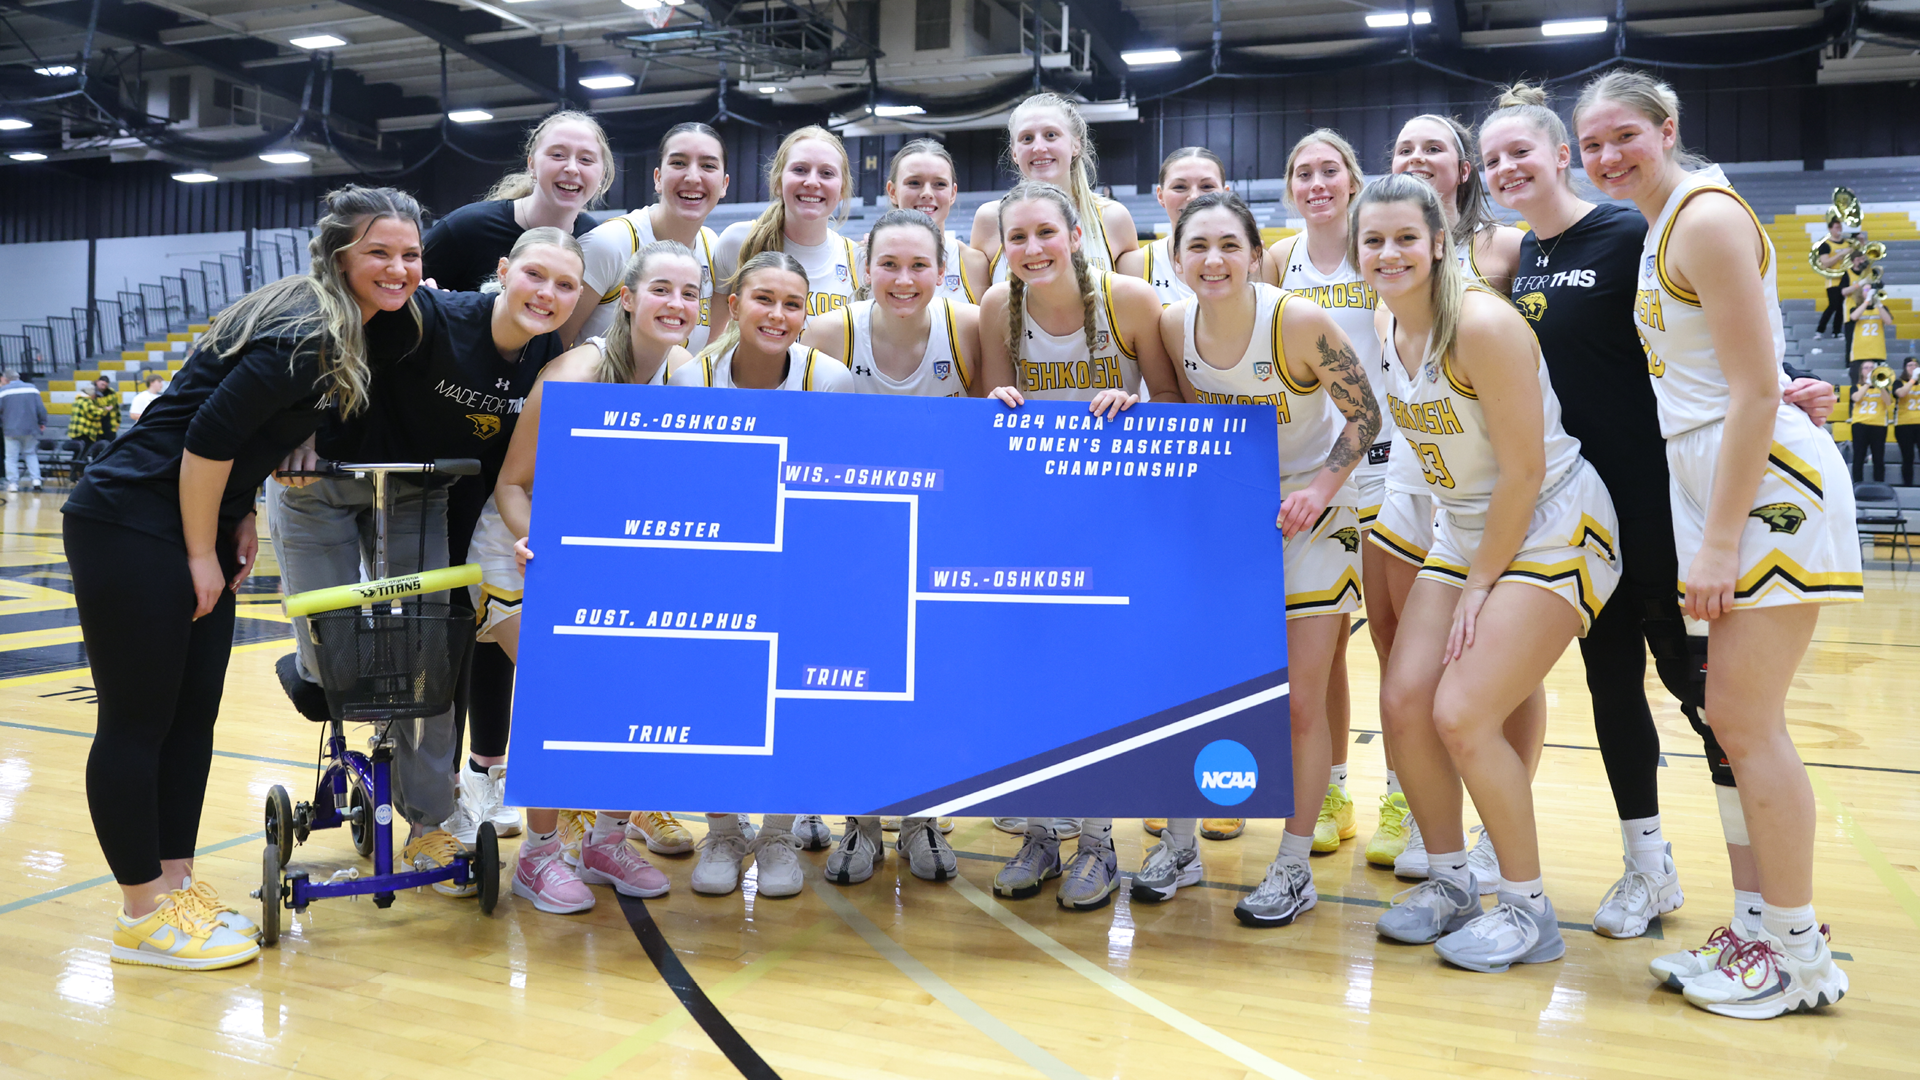 The Titans advanced to the third round of the NCAA Division III Tournament for the 11th time in program history with a 74-48 win over Trine on Saturday. Photo Credit: Steve Frommell, UW-Oshkosh Sports Information